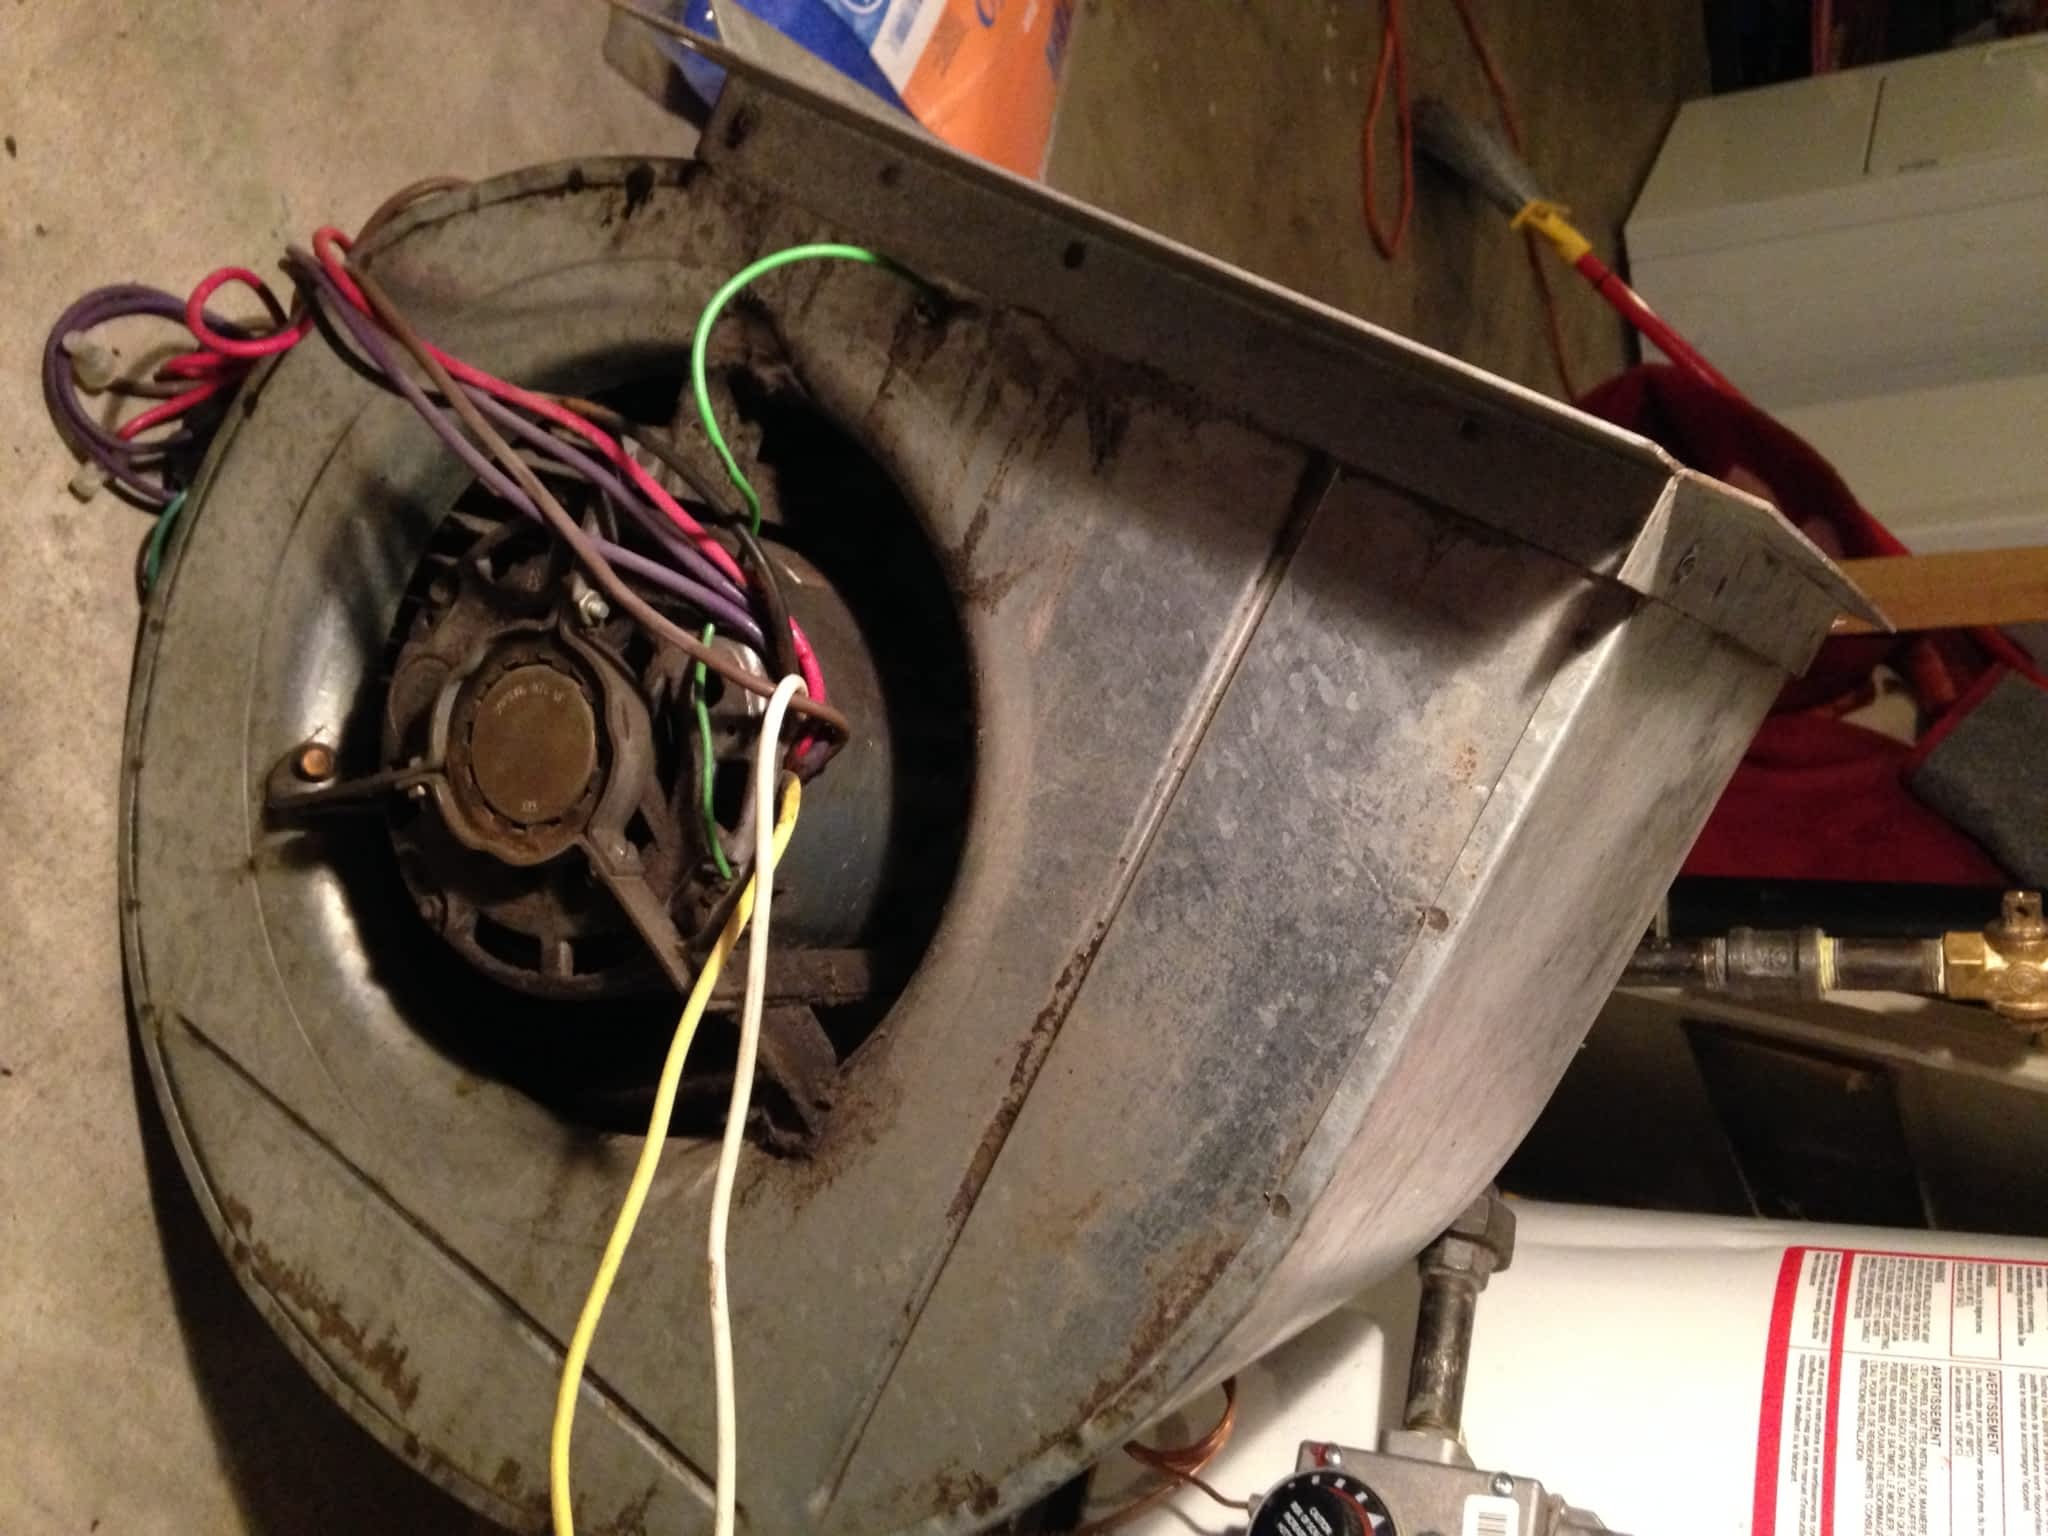 photo Tidyman Furnace & Duct Cleaning